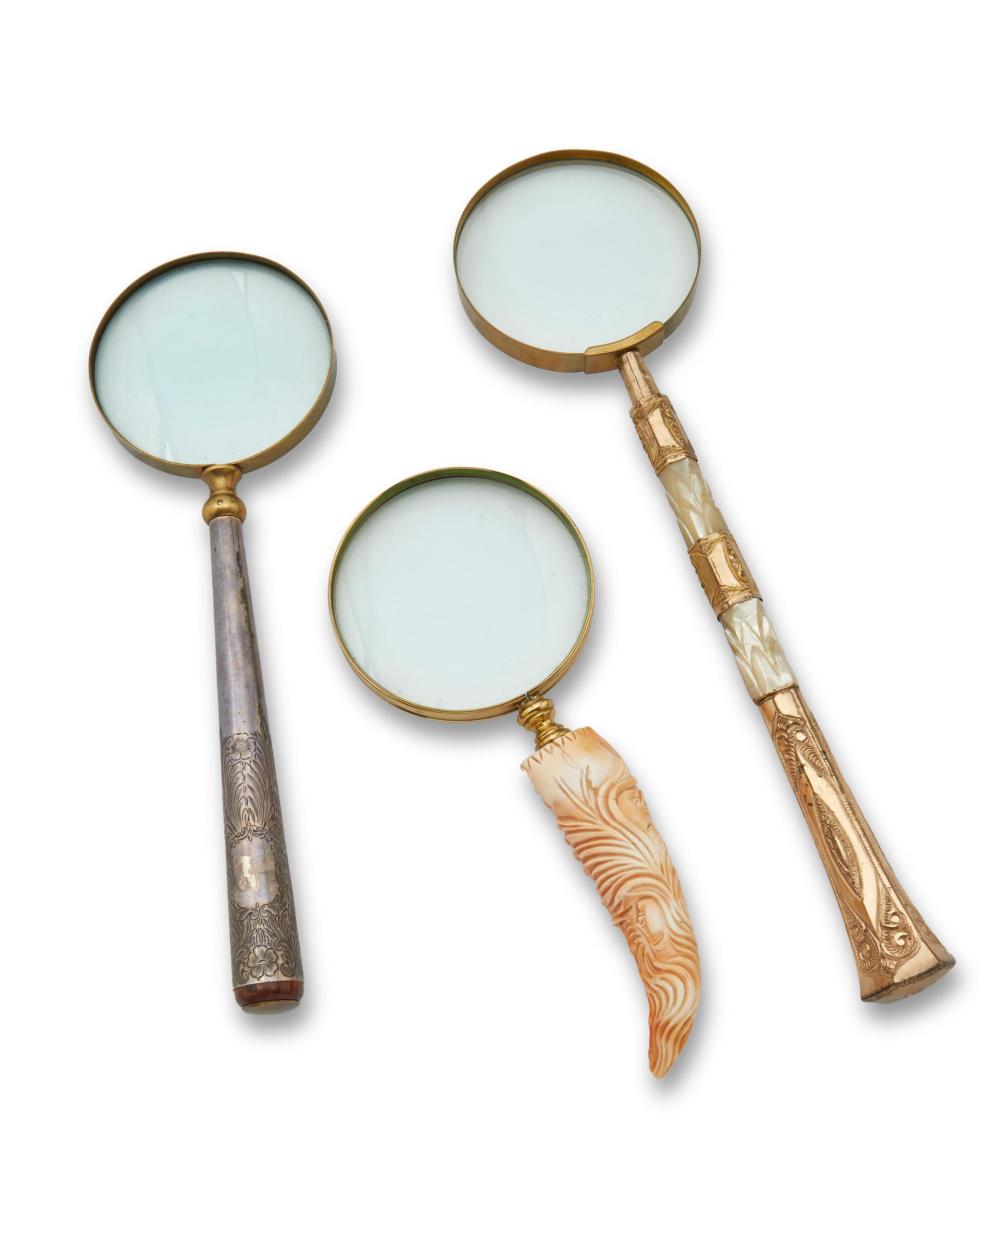 THREE MAGNIFYING GLASSESThree magnifying 2dafc1